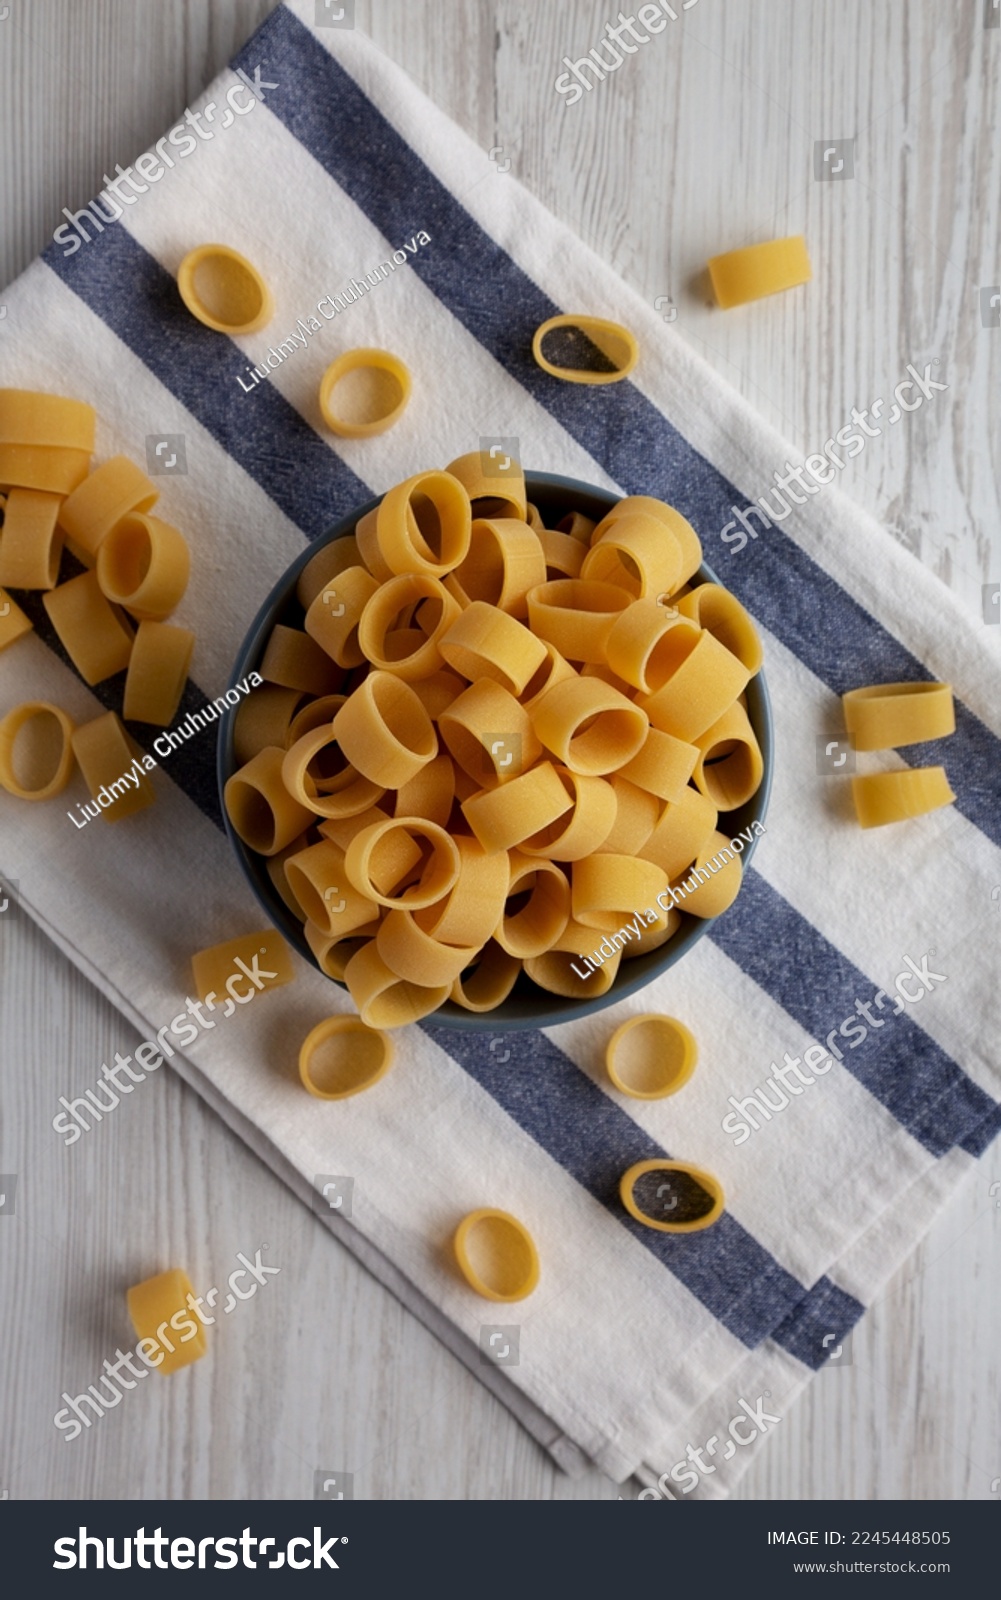 Raw Uncooked Pasta Calamarata in a Bowl, top view. Flat lay, overhead, from above. #2245448505